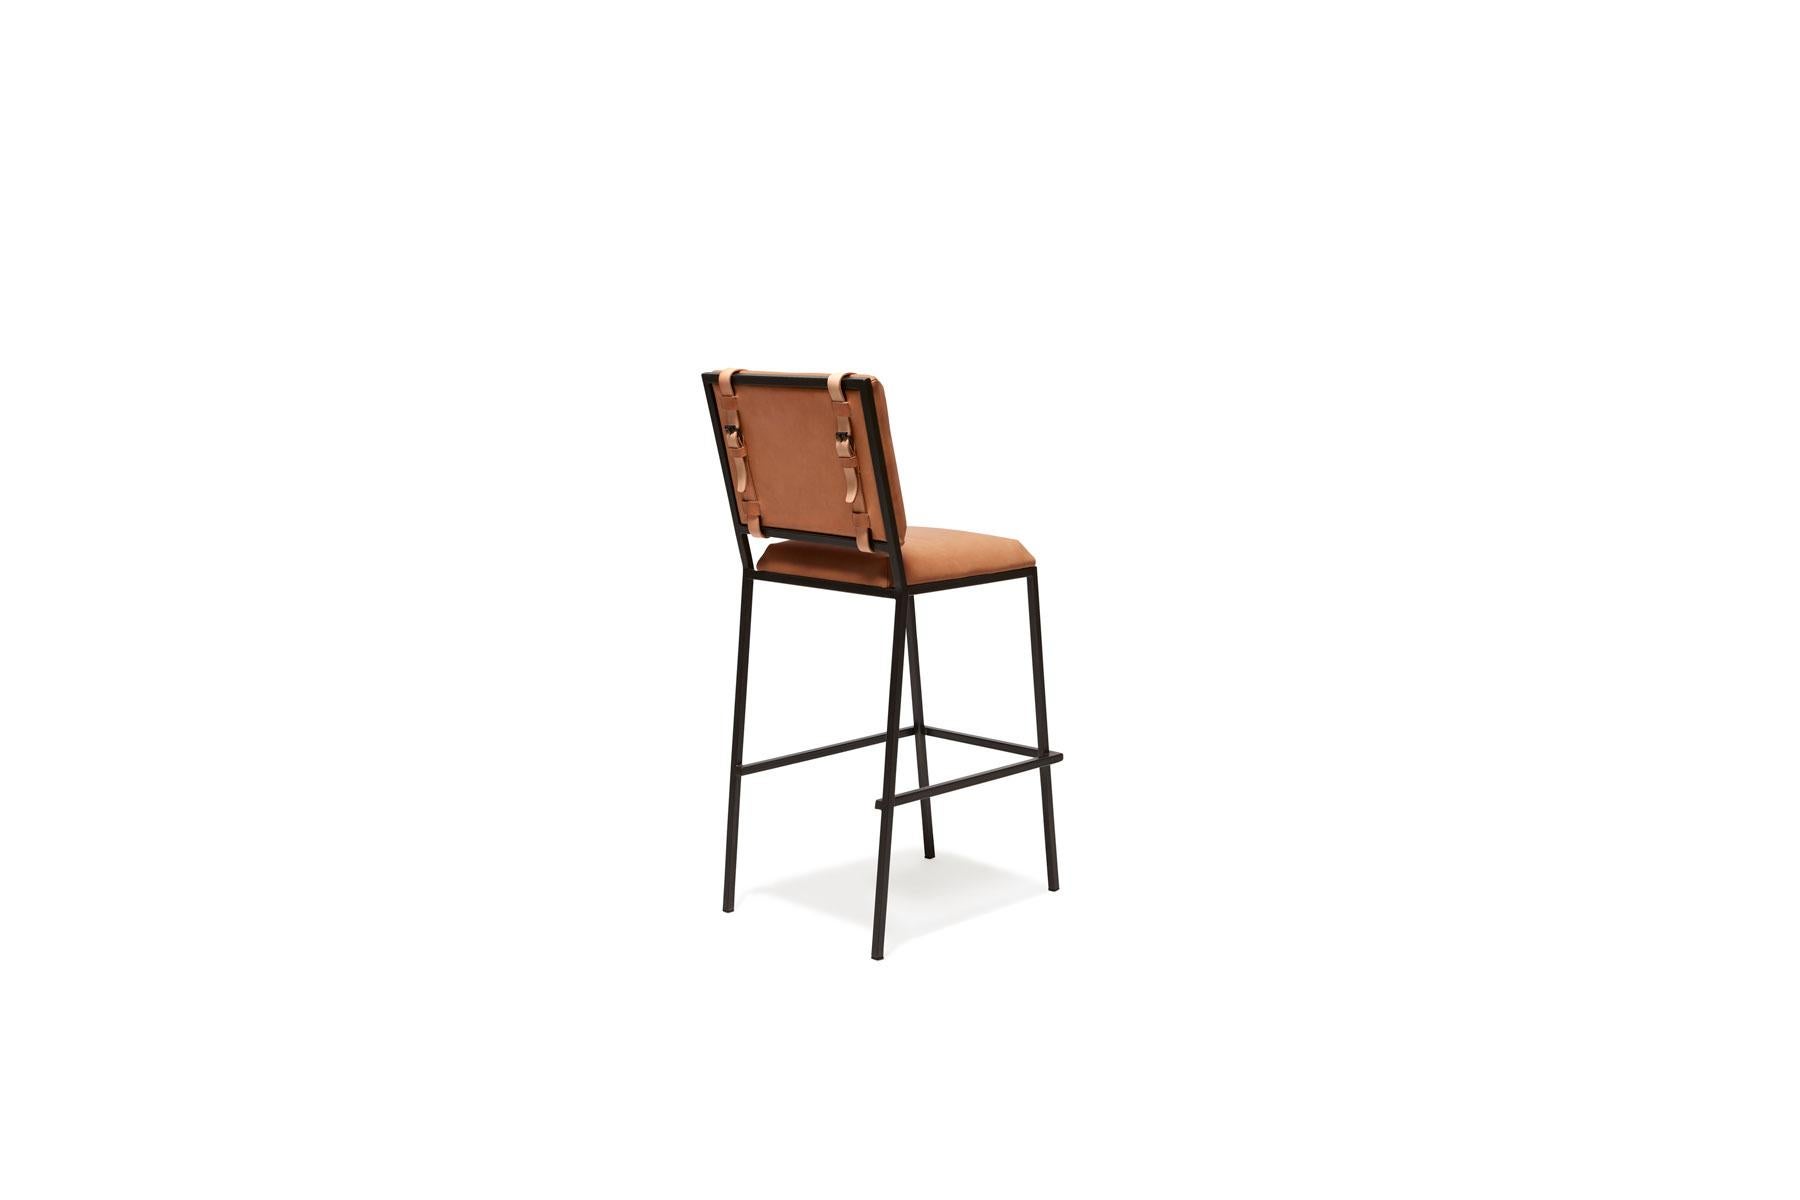 North American Natural Veg Tan Leather & Blackened Steel Barstool For Sale